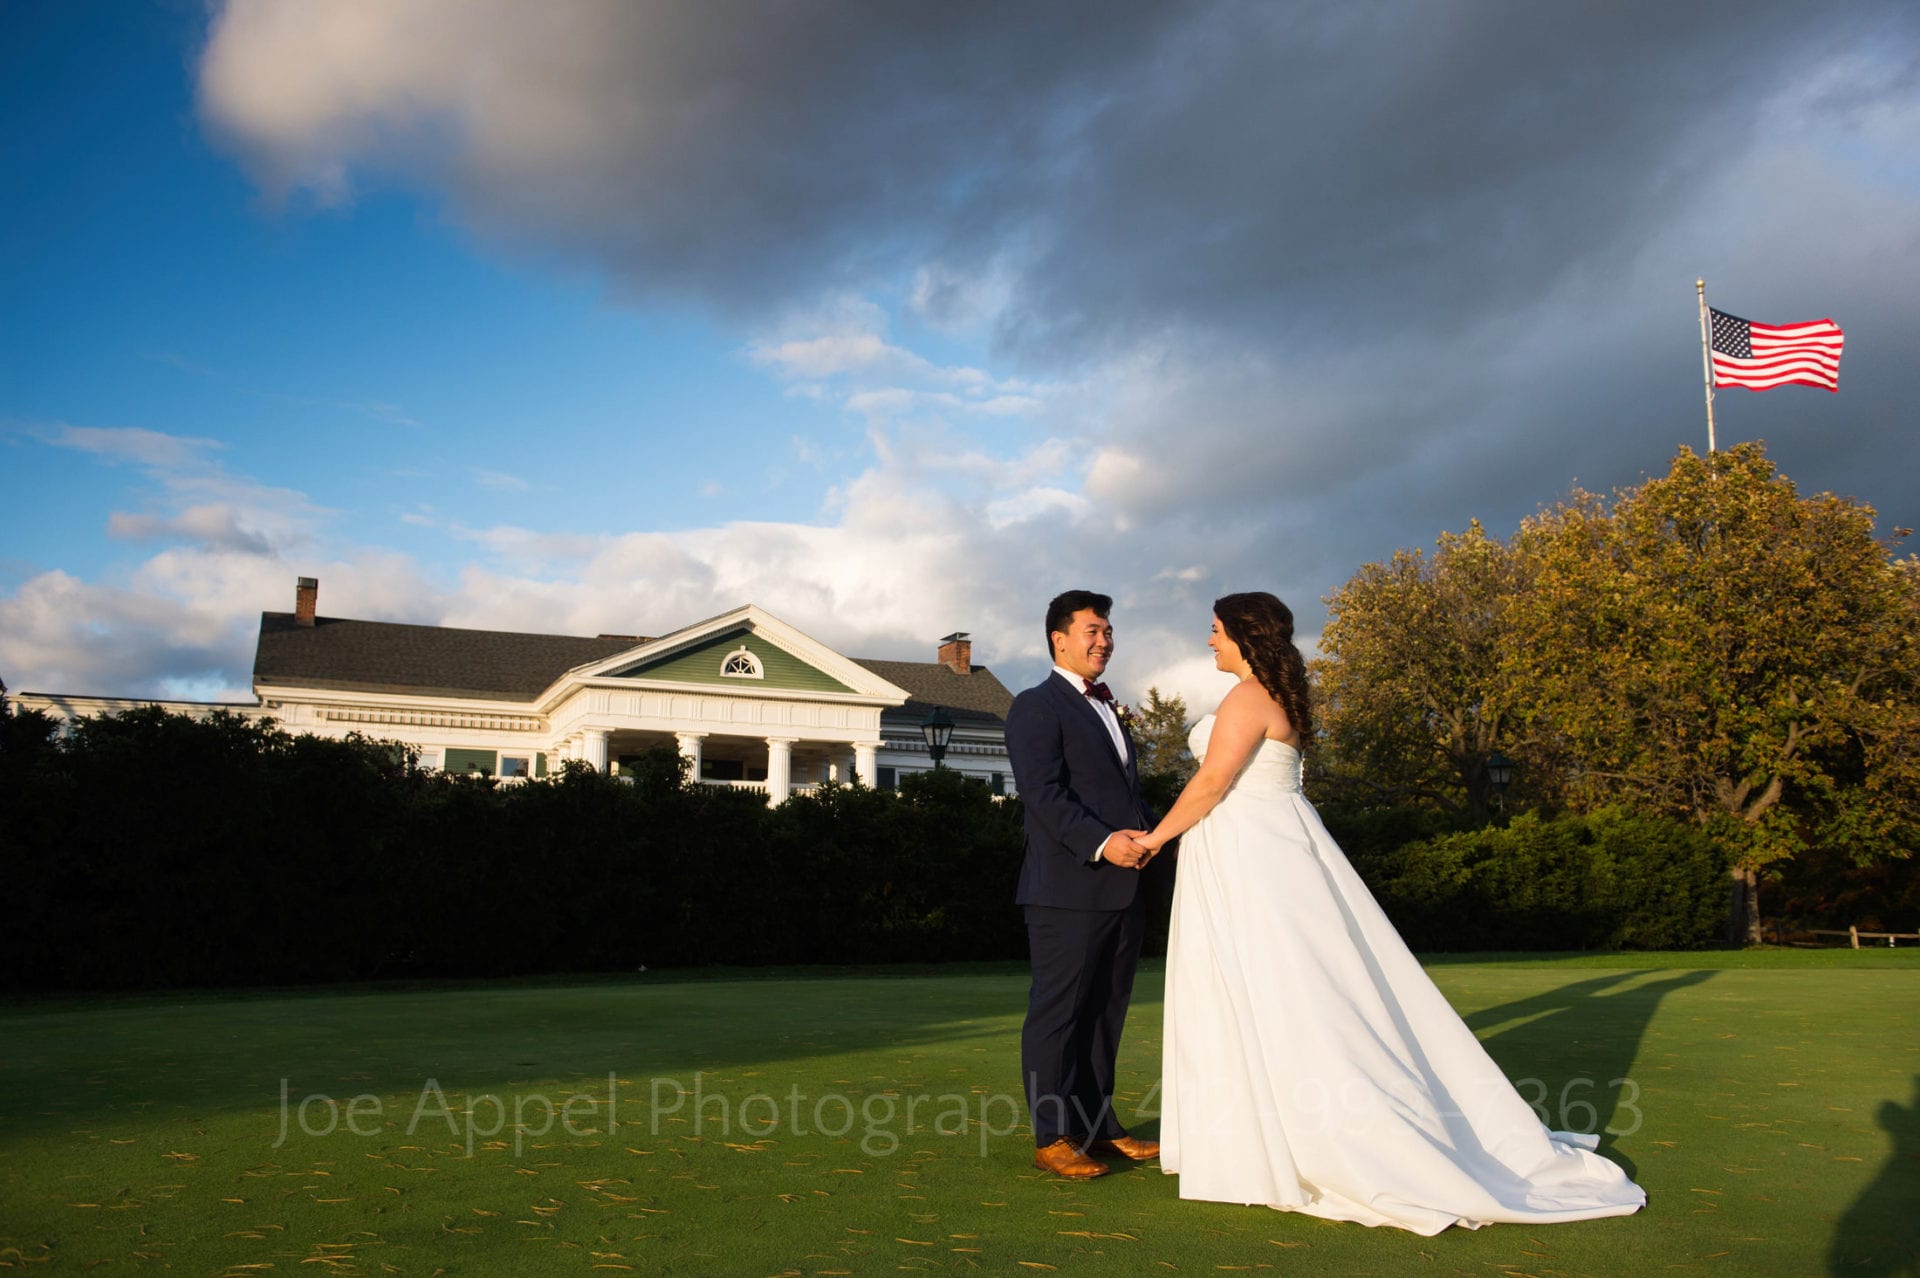 A bride in a white dress stands facing her groom wearing a dark blue suit, brown shoes, and a bow tie. There is a green and white mansion behind them with a hedgerow between them. The skies are blue with dark, puffy clouds. An American flag flies in the upper right part of the frame. Pittsburgh Golf Club Weddings.